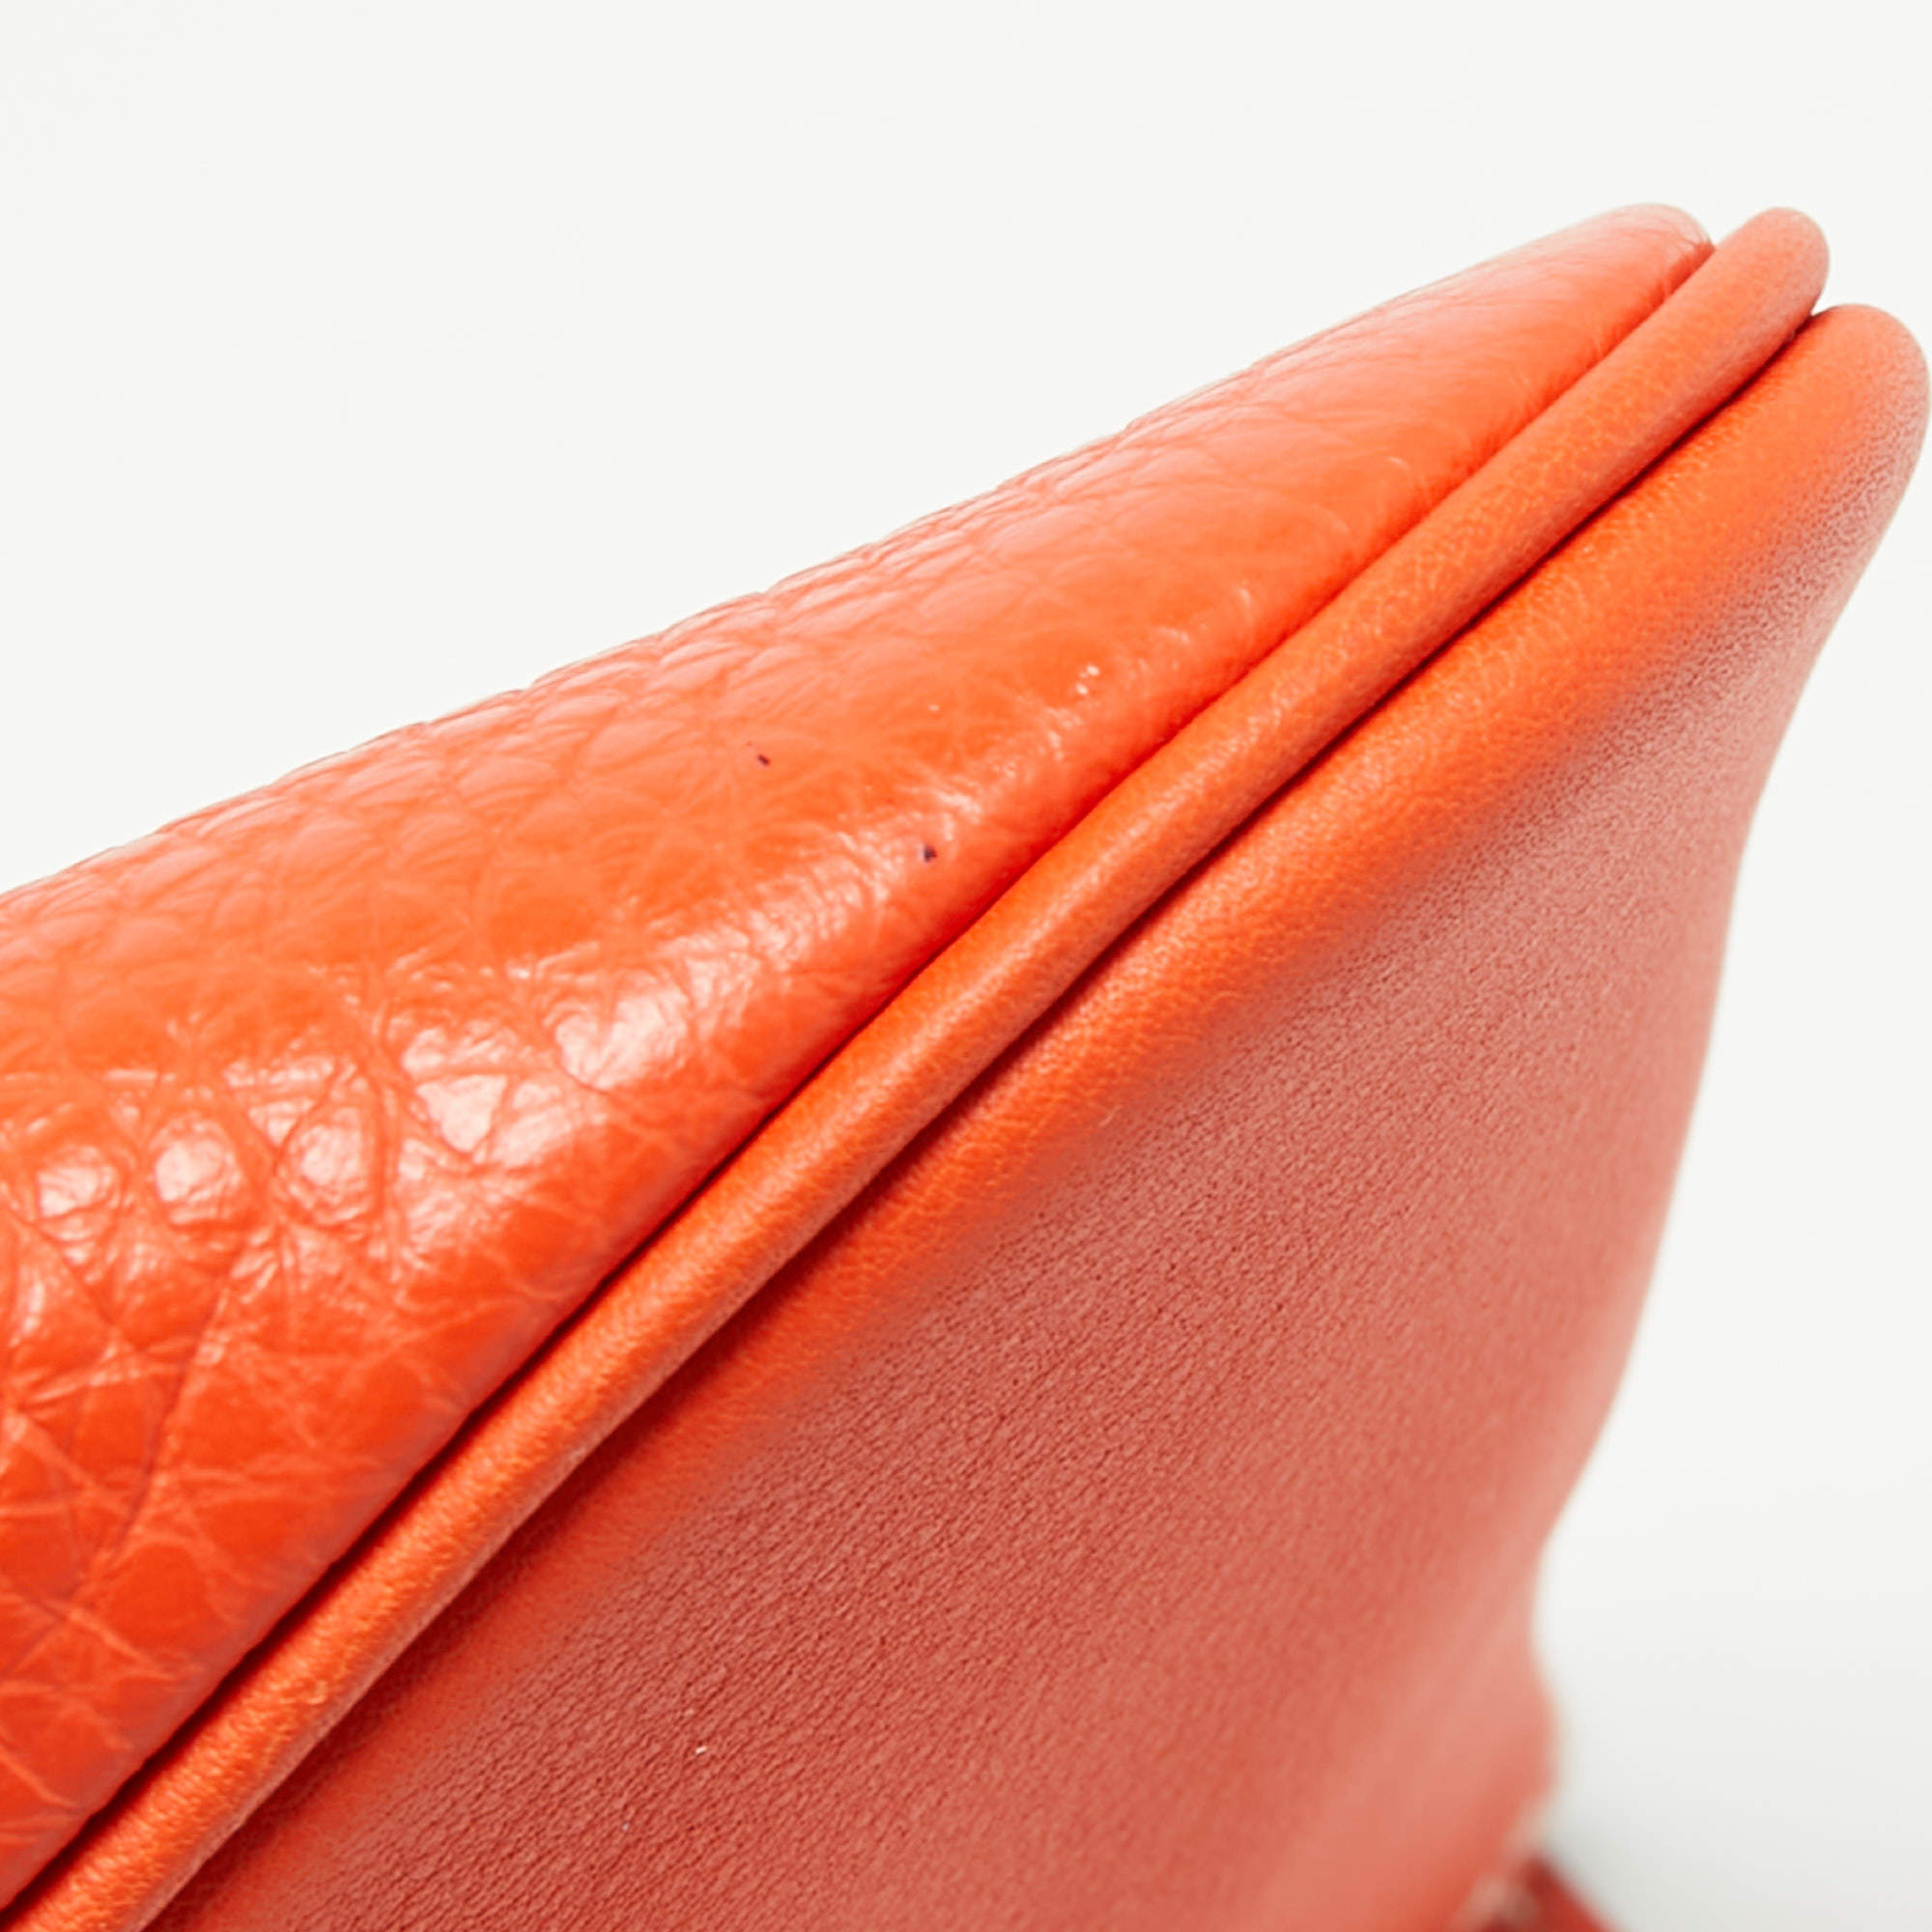 Hermes Orange Poppy Clemence and Swift Leather Virevolte Clutch